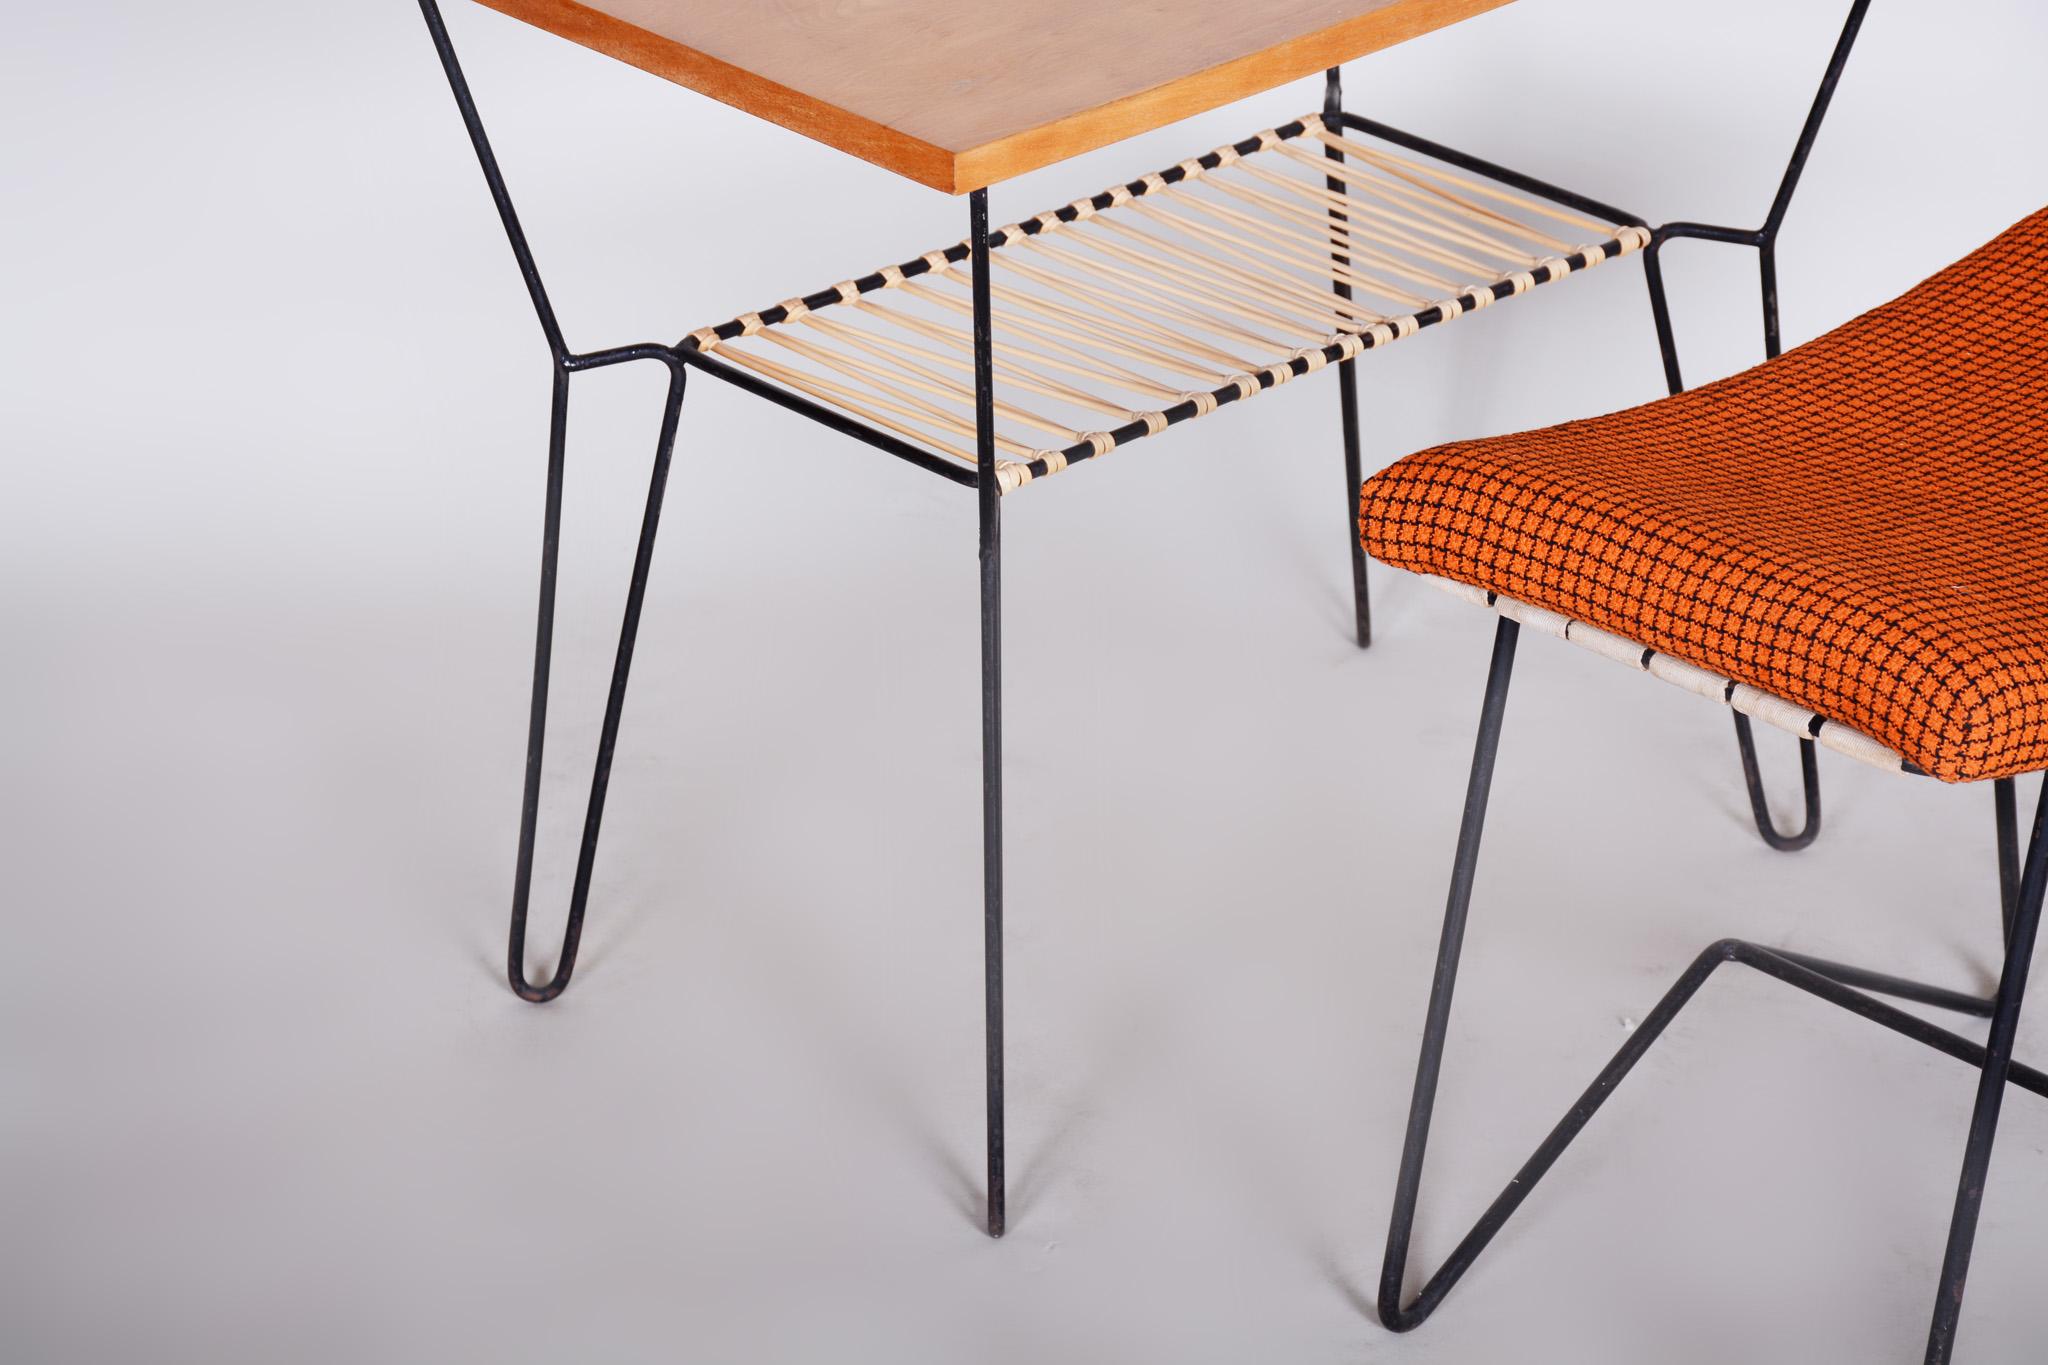 Steel Set of Midcentury Orange Stool and Beech Table, Preserved Condition, 1950s For Sale